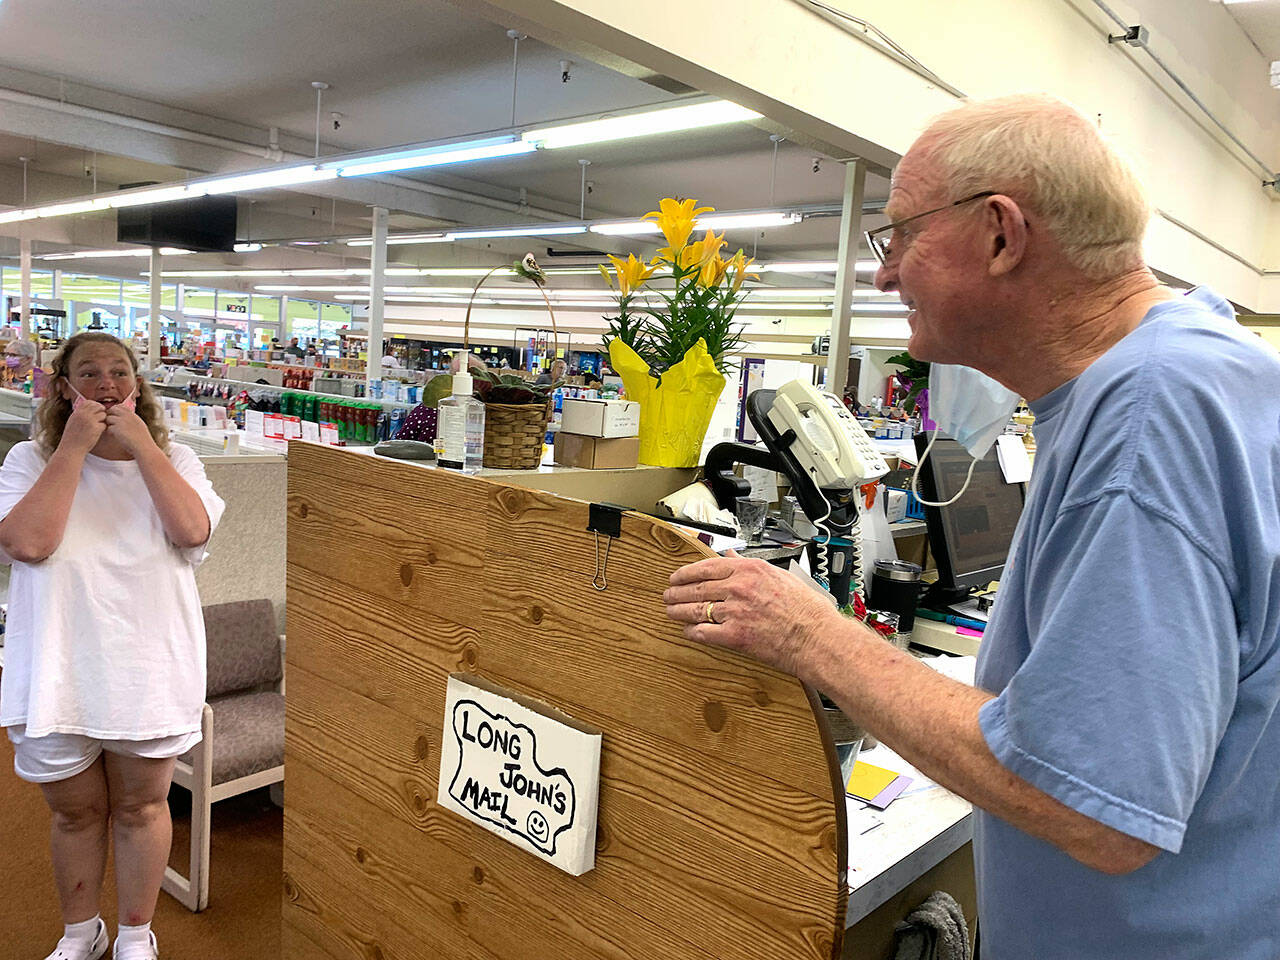 Customer Laura Reedy to retiring pharmacist Ken Paskett: “Ken, you can’t leave us!” she said with a smile. “What will we do without you?” (Bob Smith | Kitsap Daily News)